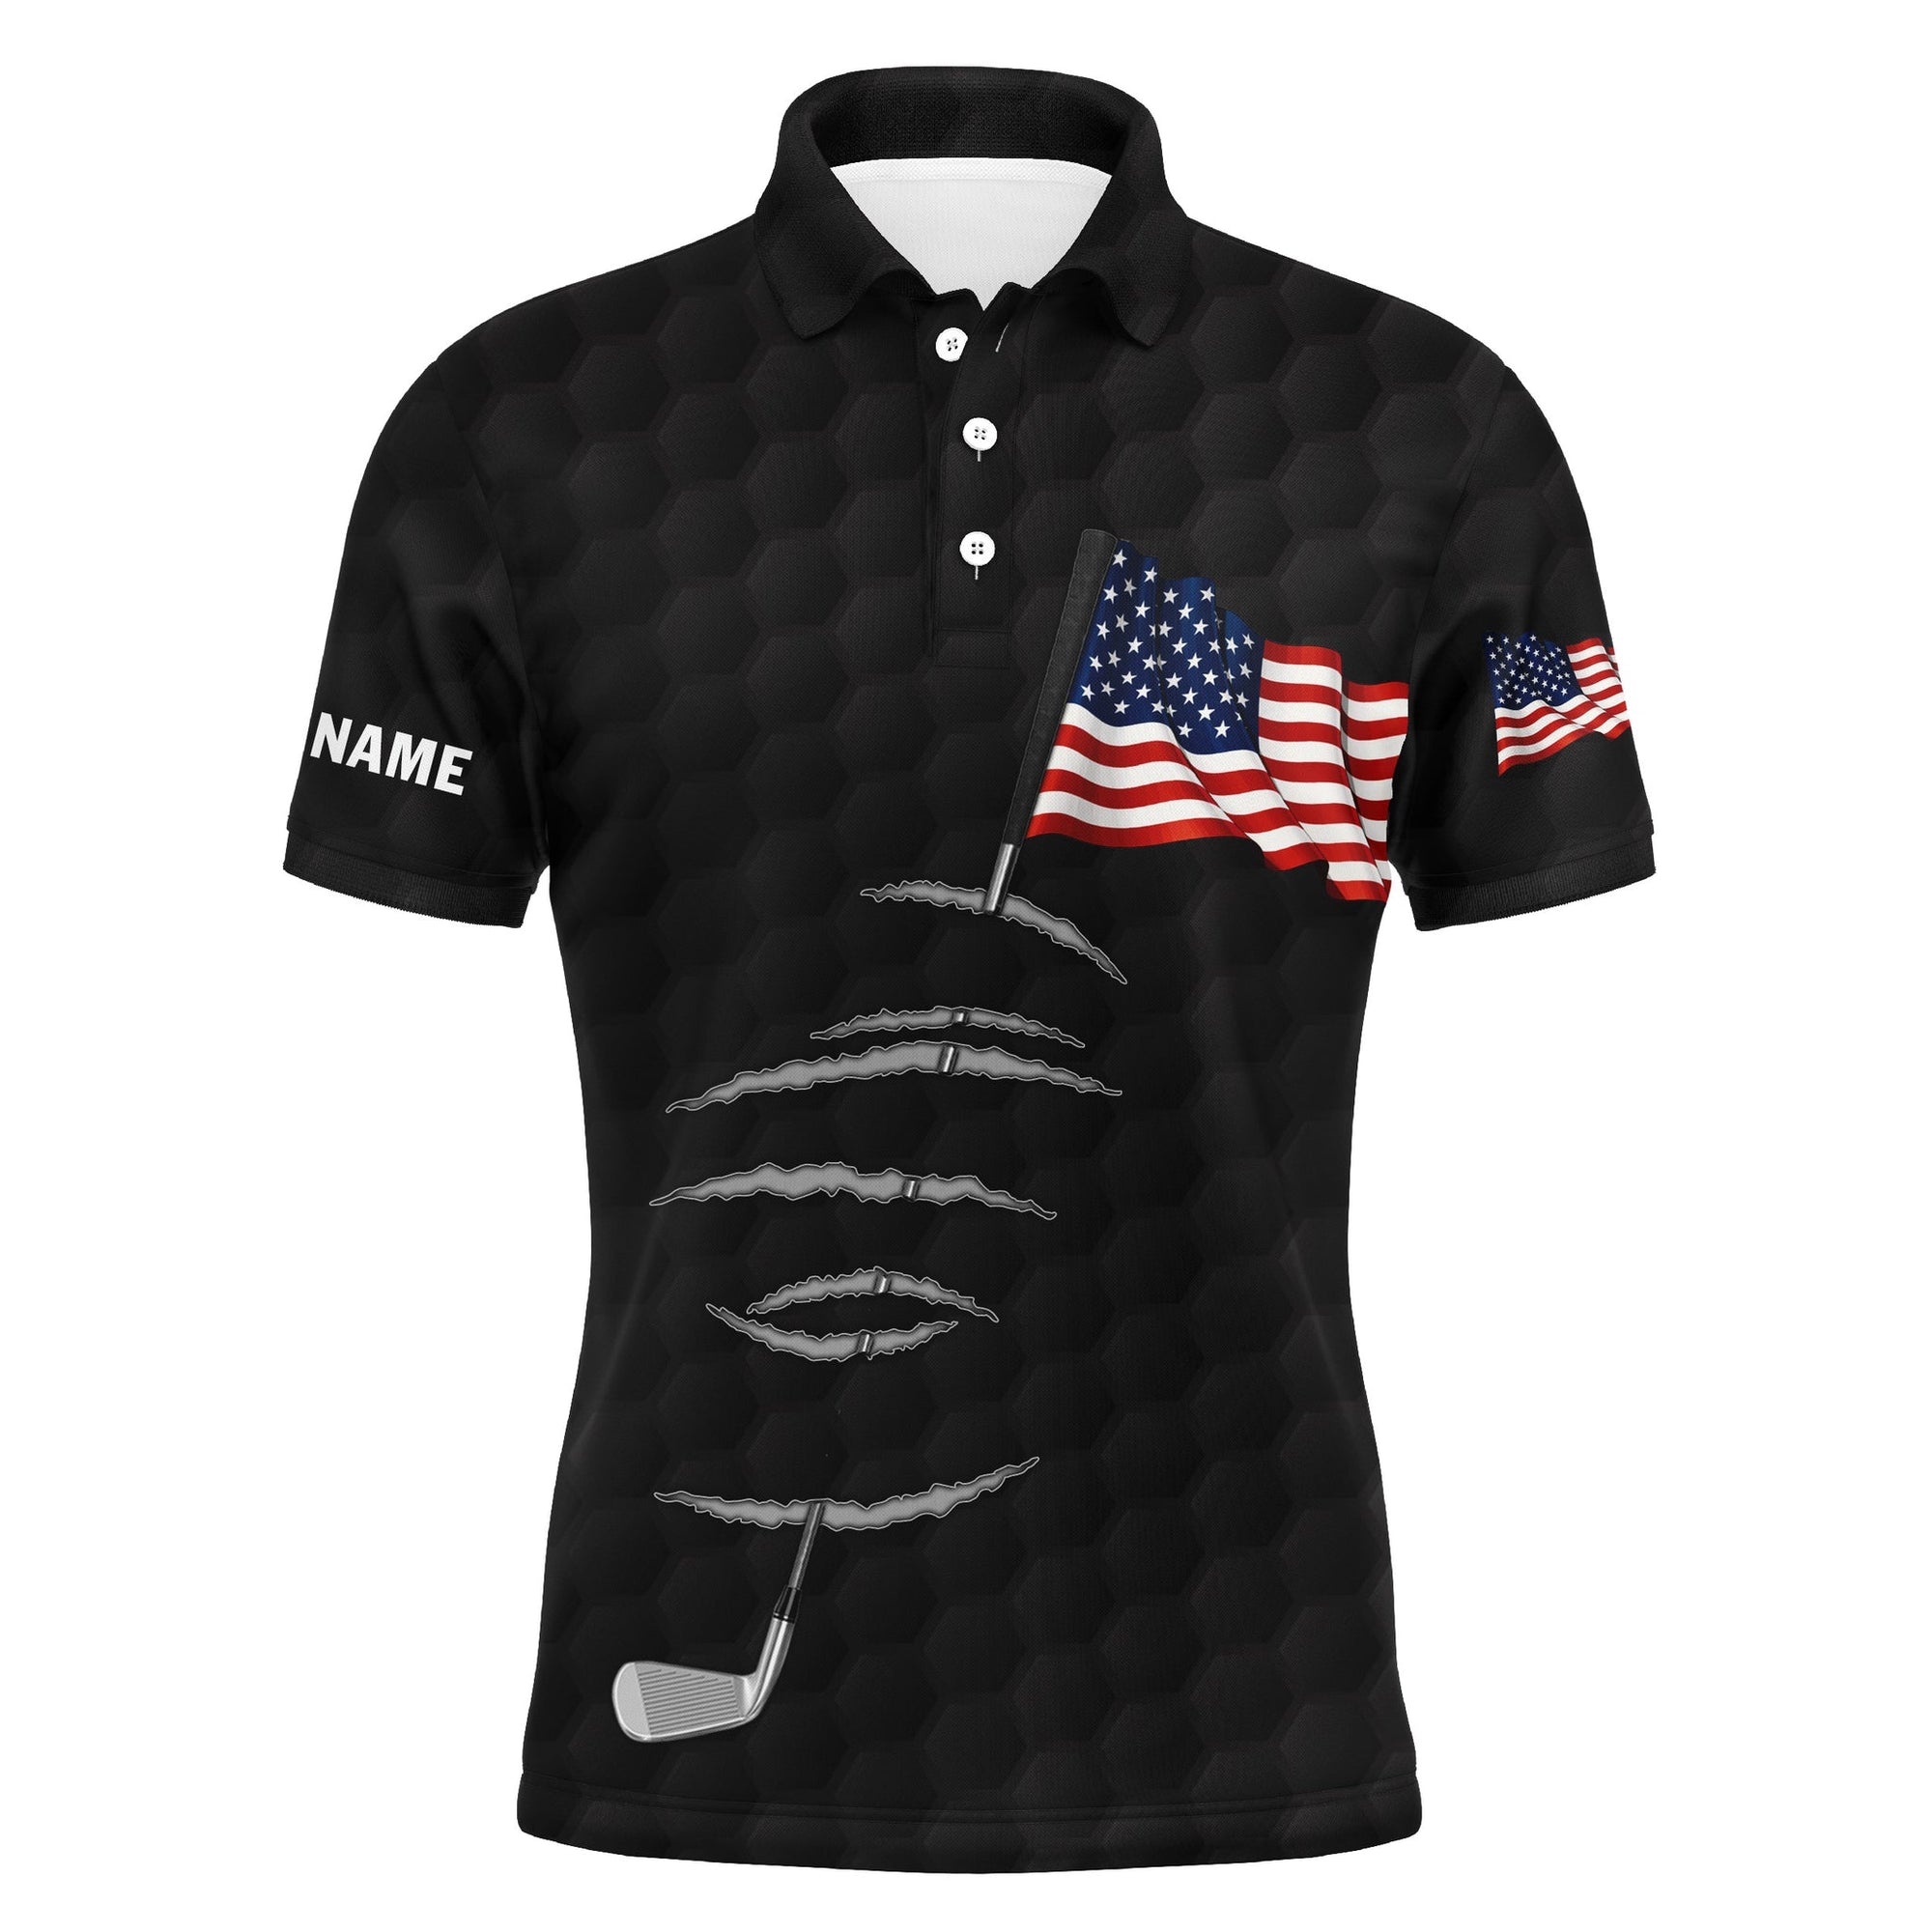 Golf Men Polo Shirt - Golf Clubs American Flag 4th July Custom Name Apparel - Personalized Gift For Golf Lover, Team, Golfers, Patriotic